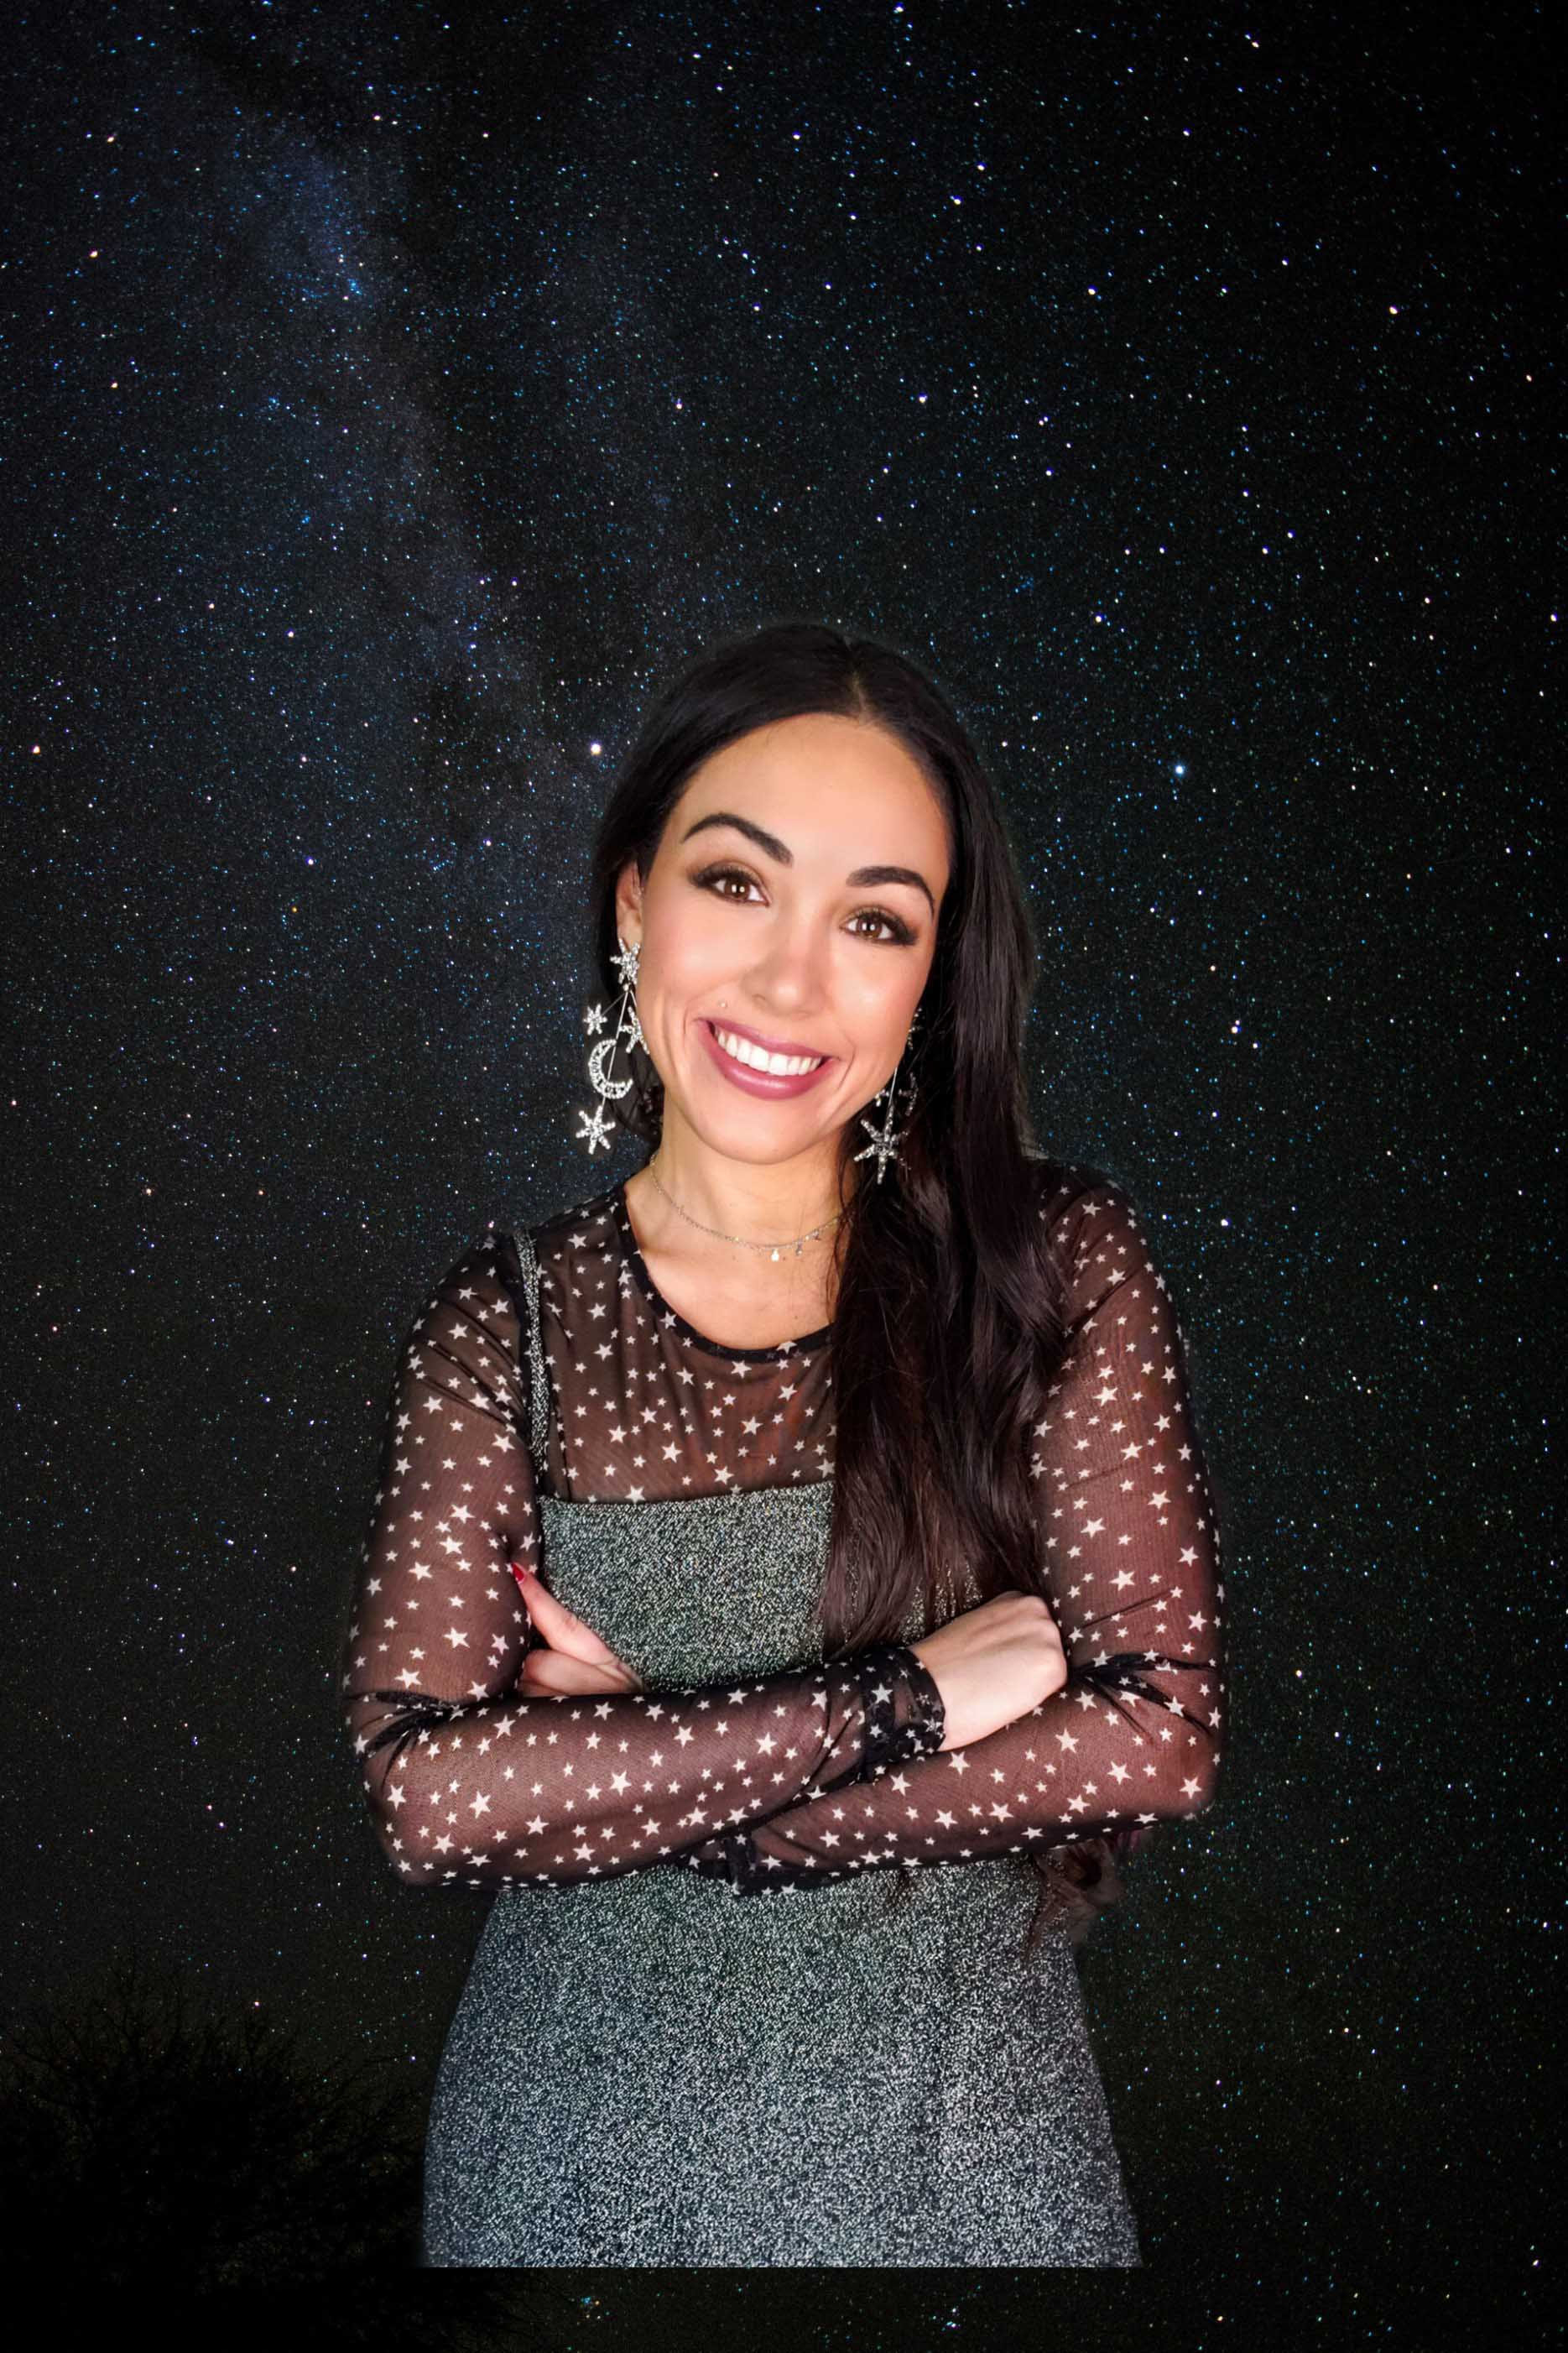 US space professional Kellie Gerardi, who has a personal mission to democratise space